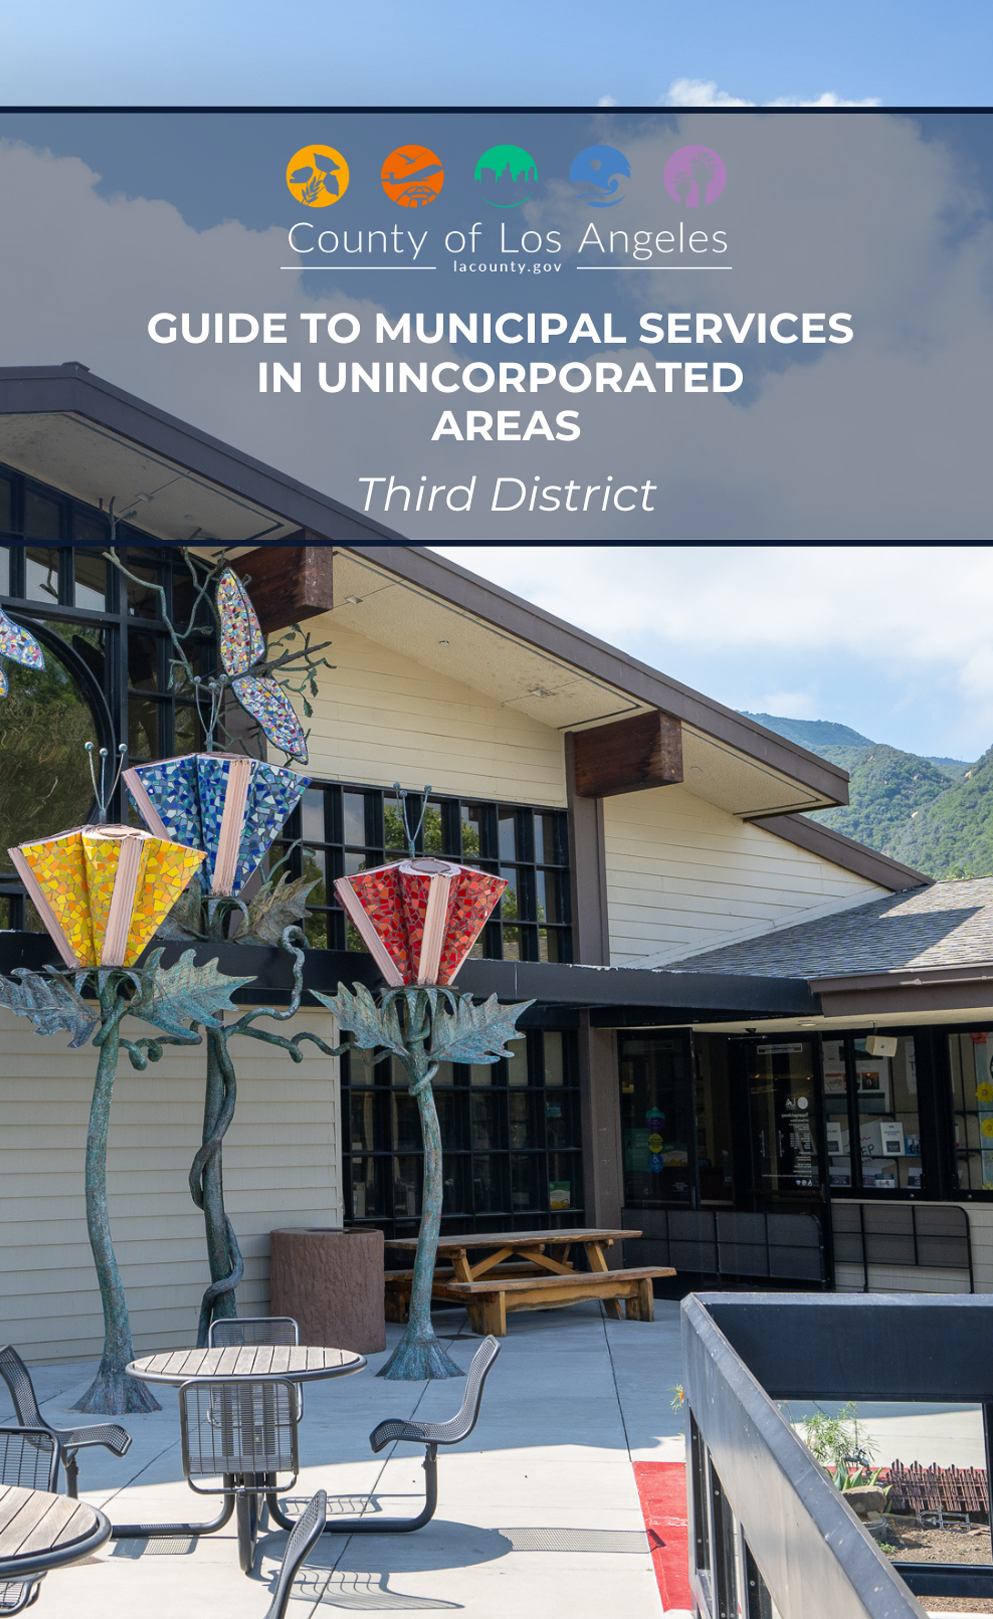 Cover art for the unincorporated services guide for the third supervisorial district.